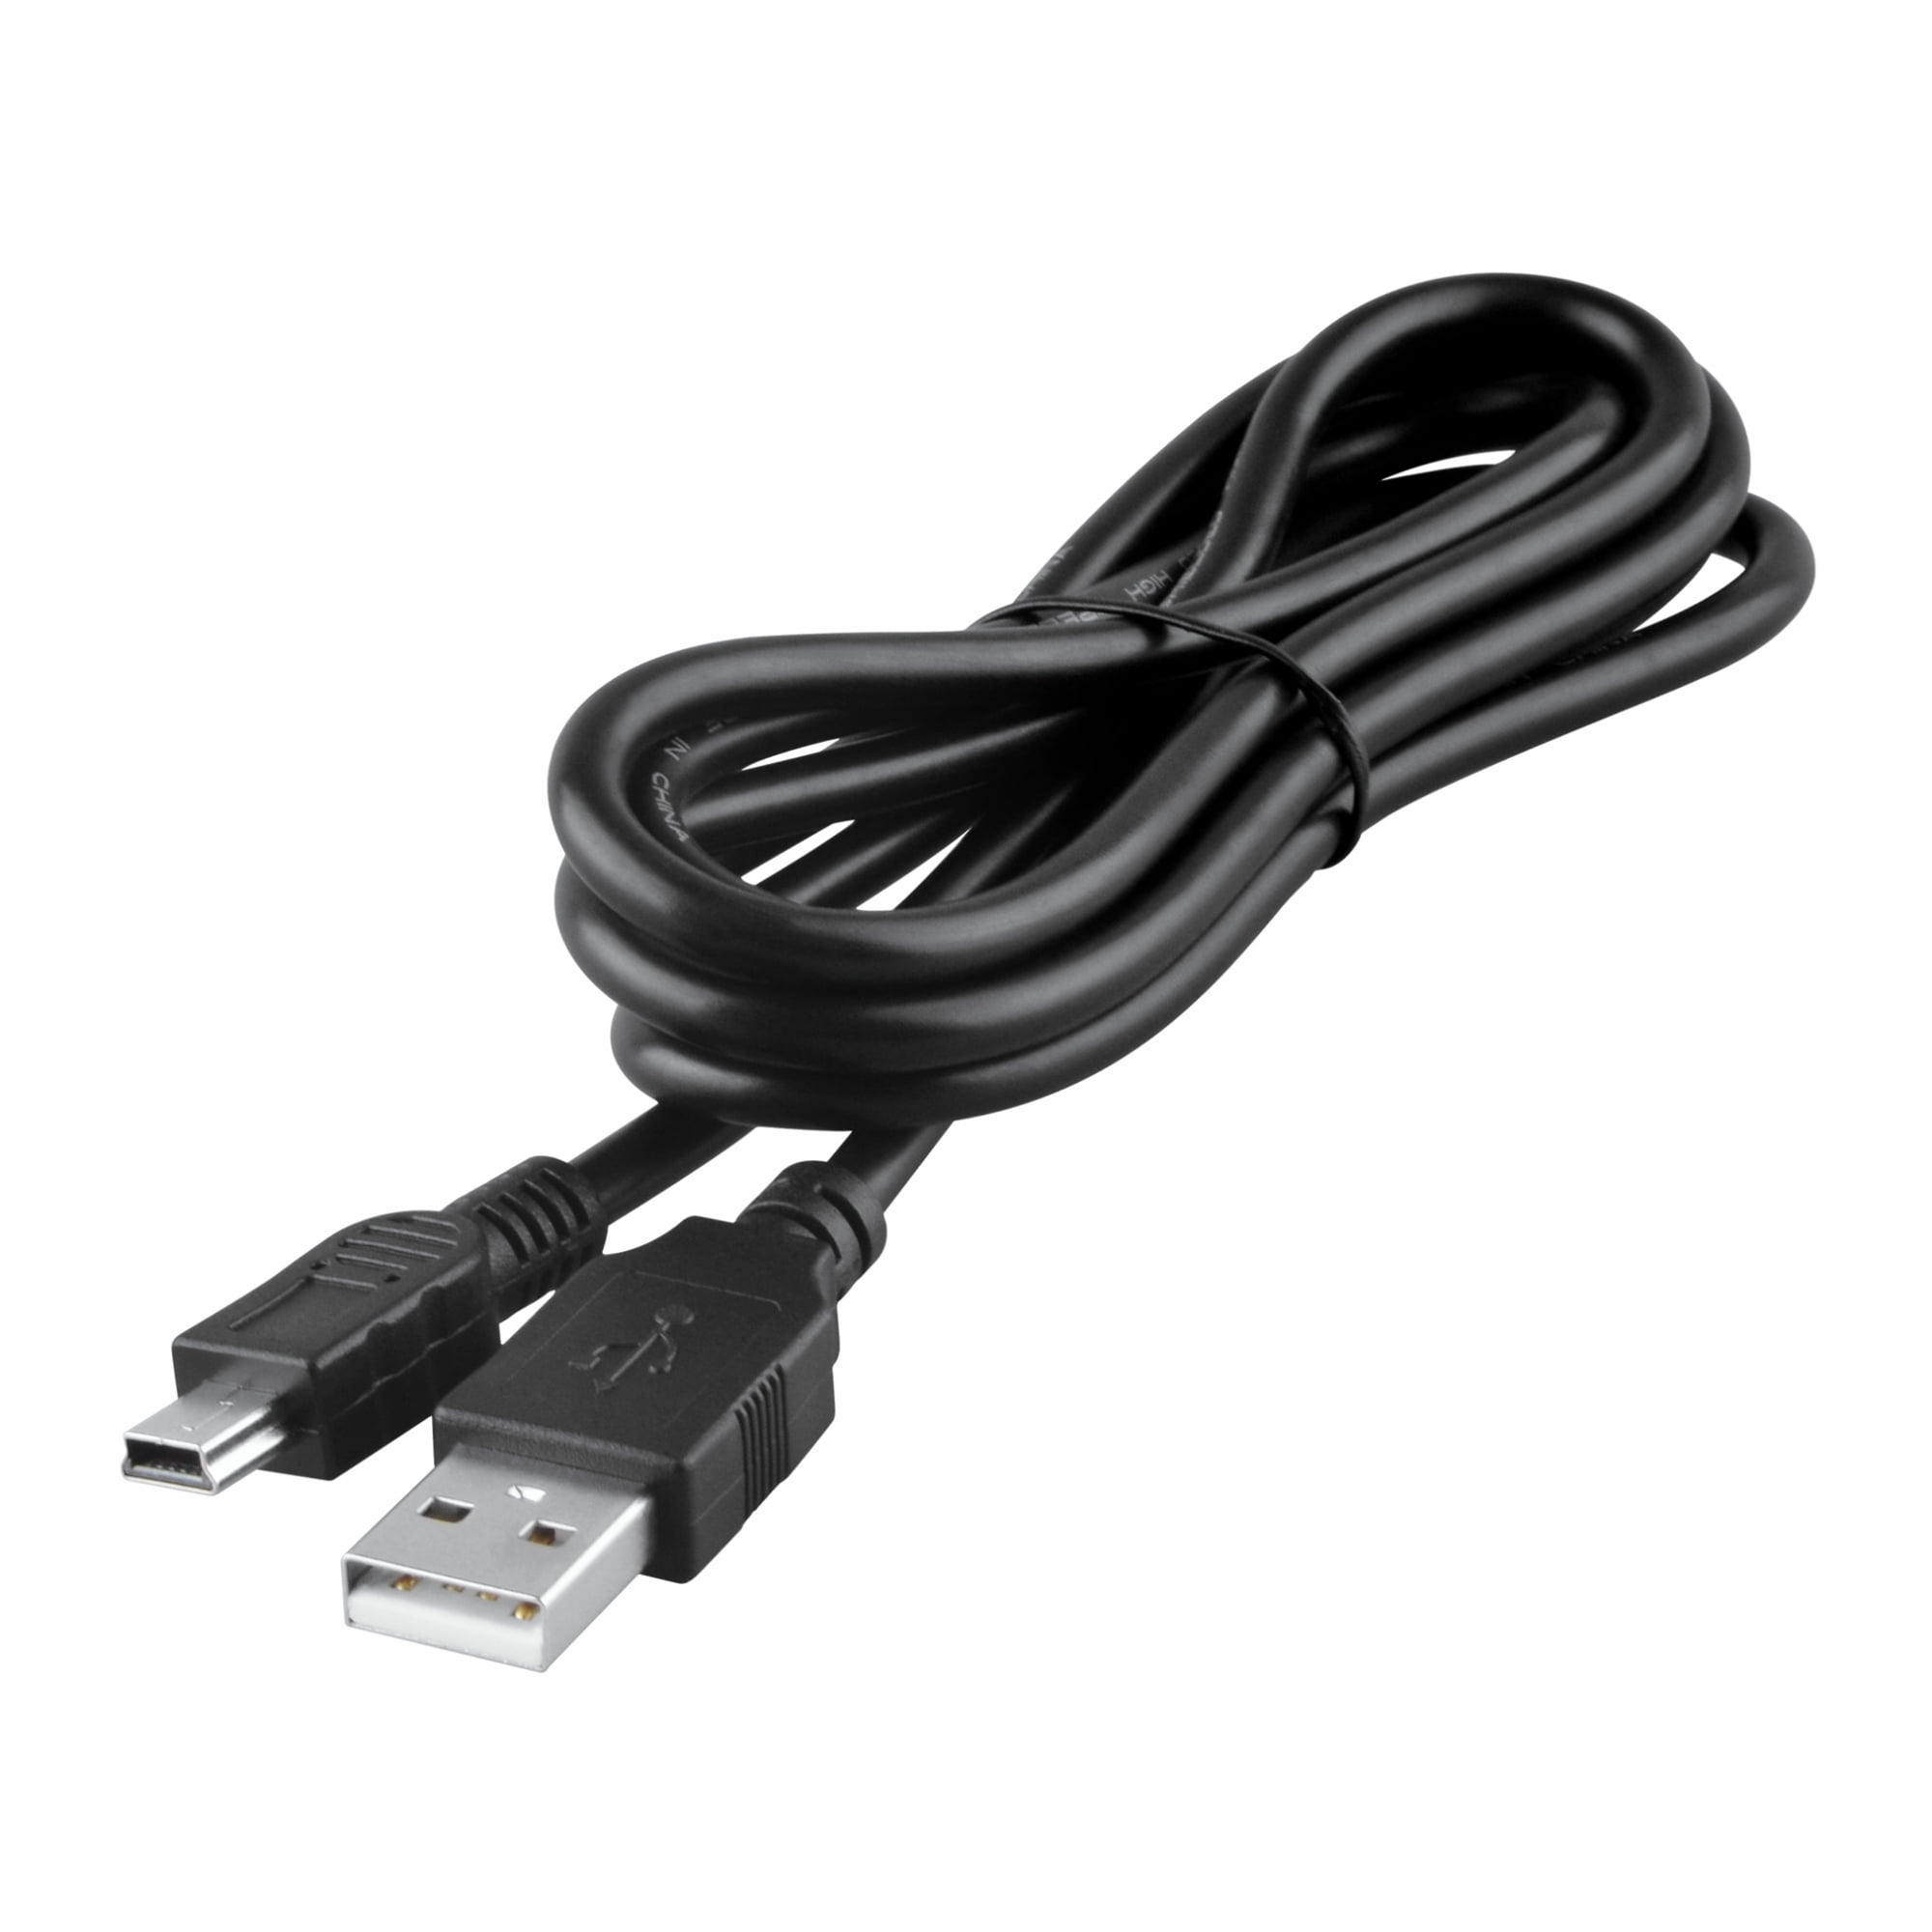 LEAD FOR PC AND MAC SONY  DSC-F828,DSC-H1 CAMERA USB DATA SYNC CABLE 